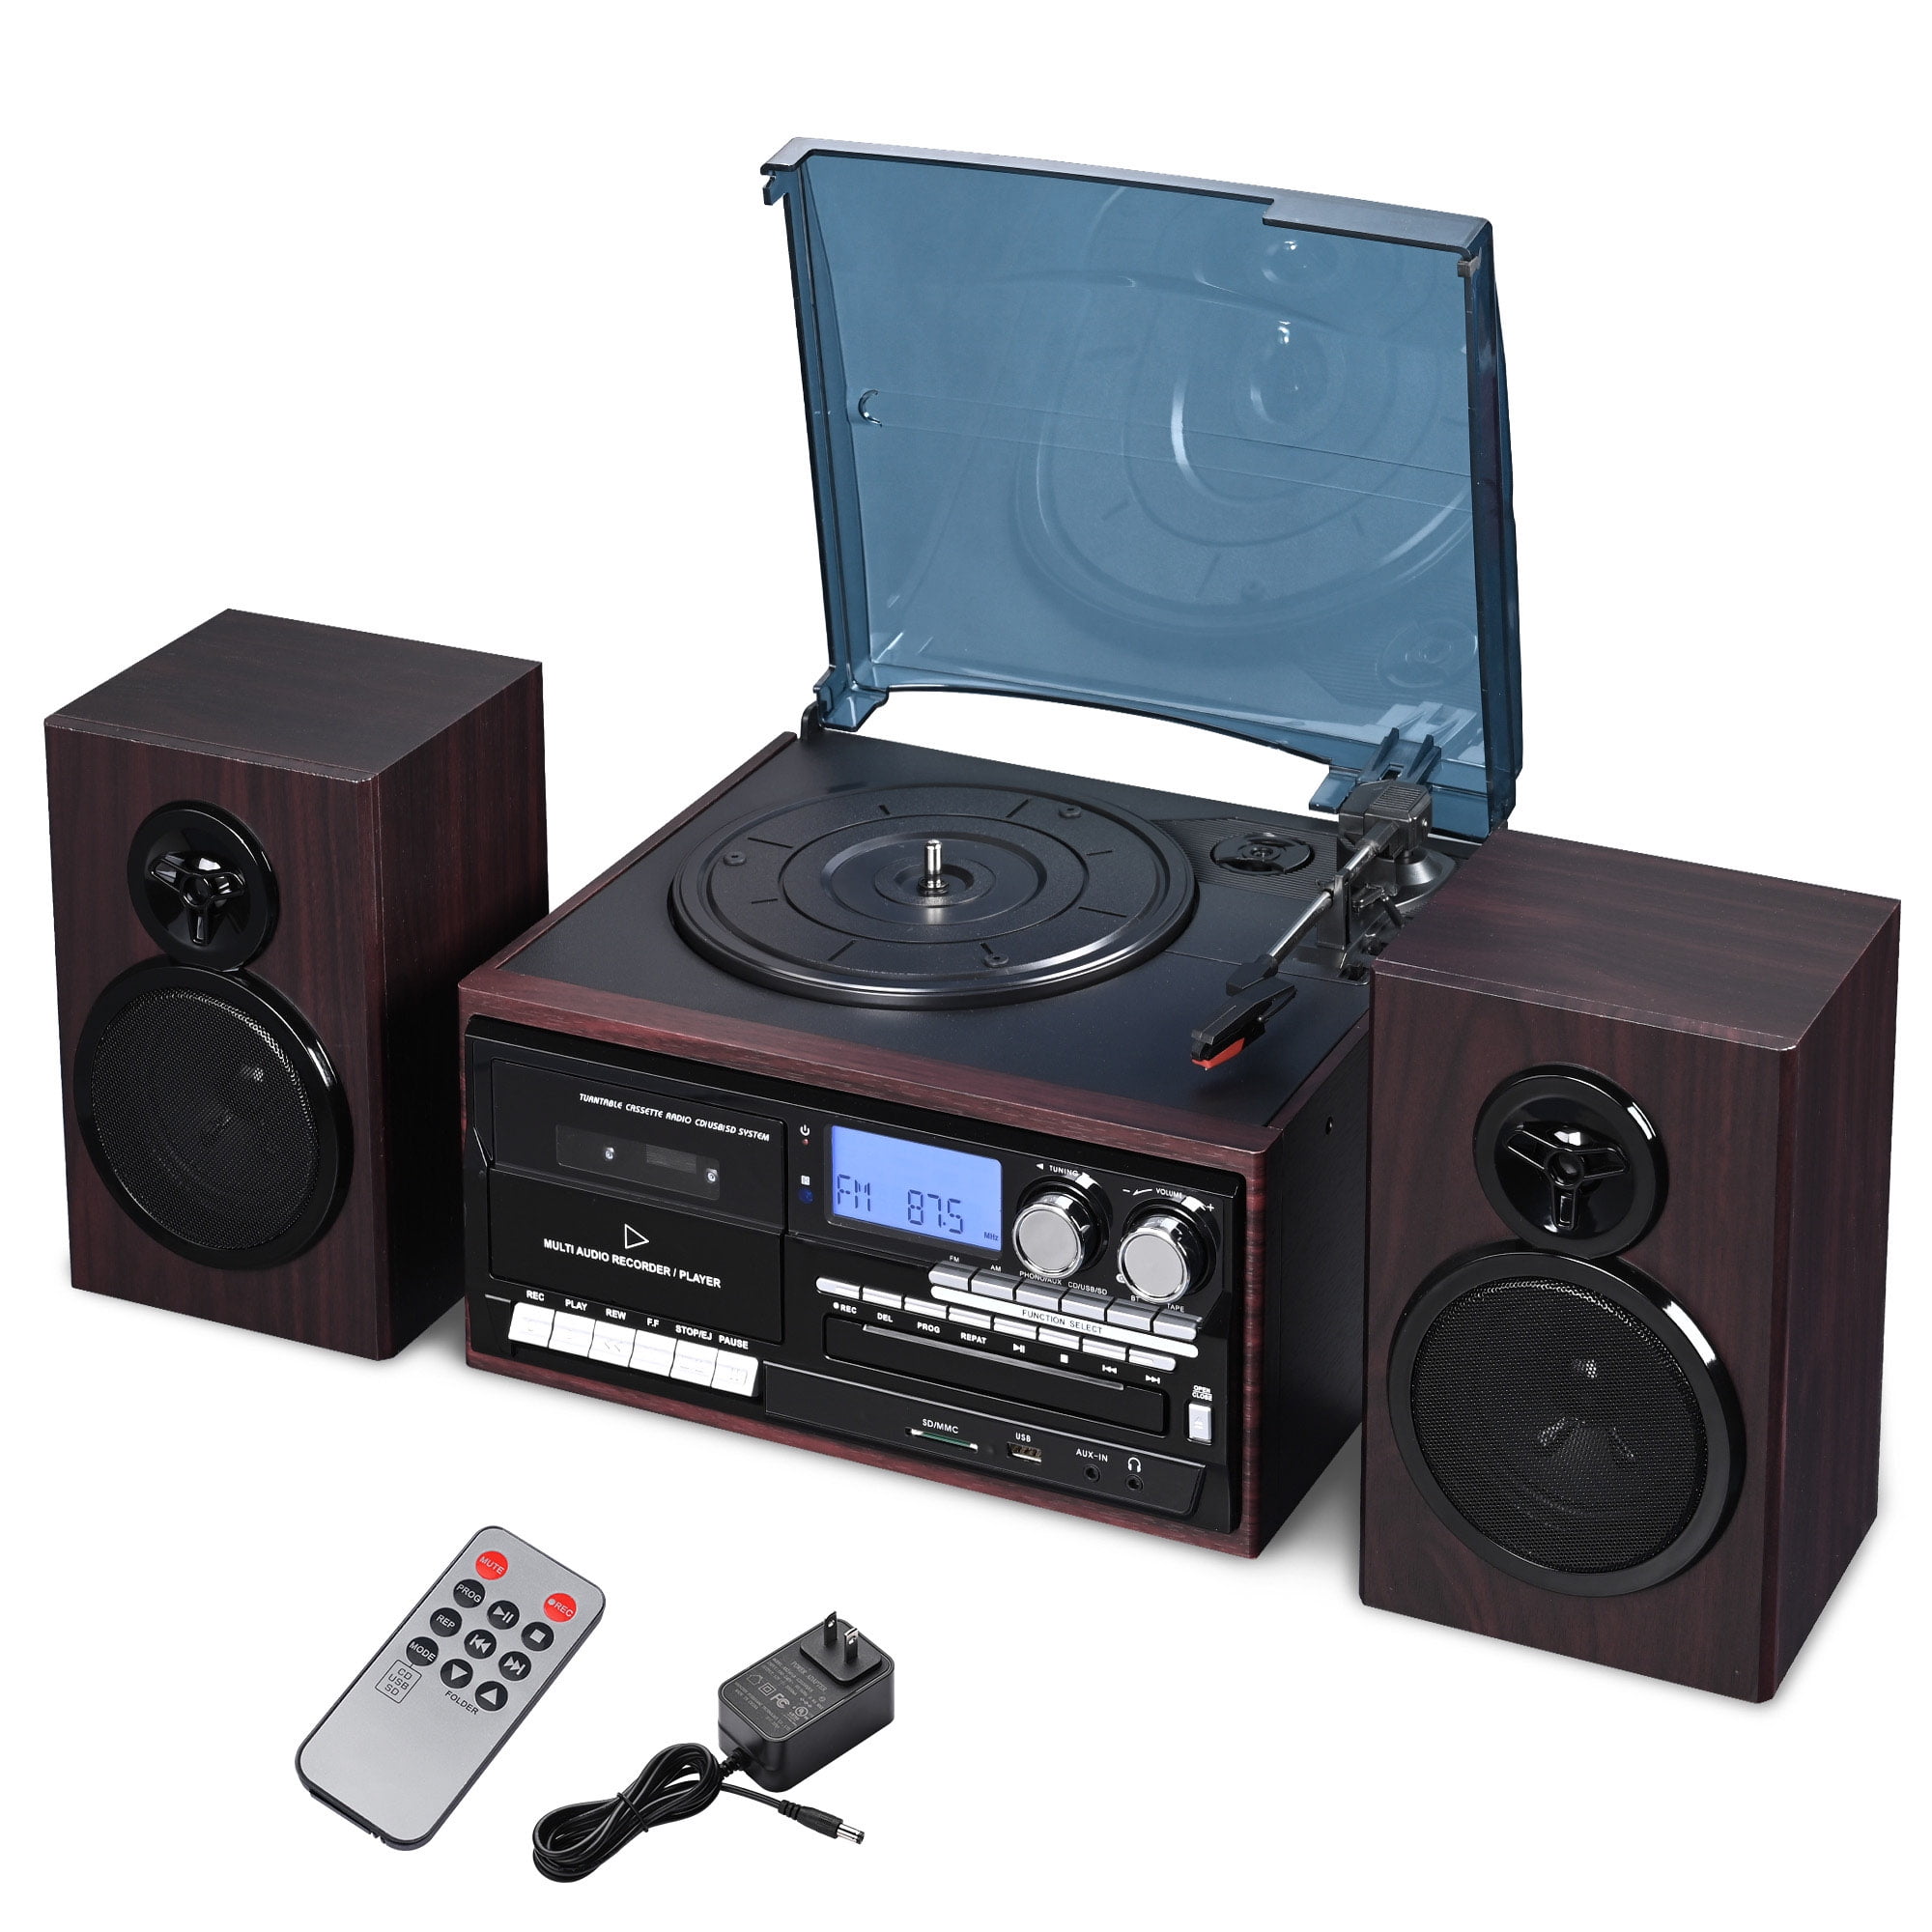 DIGITNOW Turntable Record Player Multi Function w/ Built in Stereo Speakers